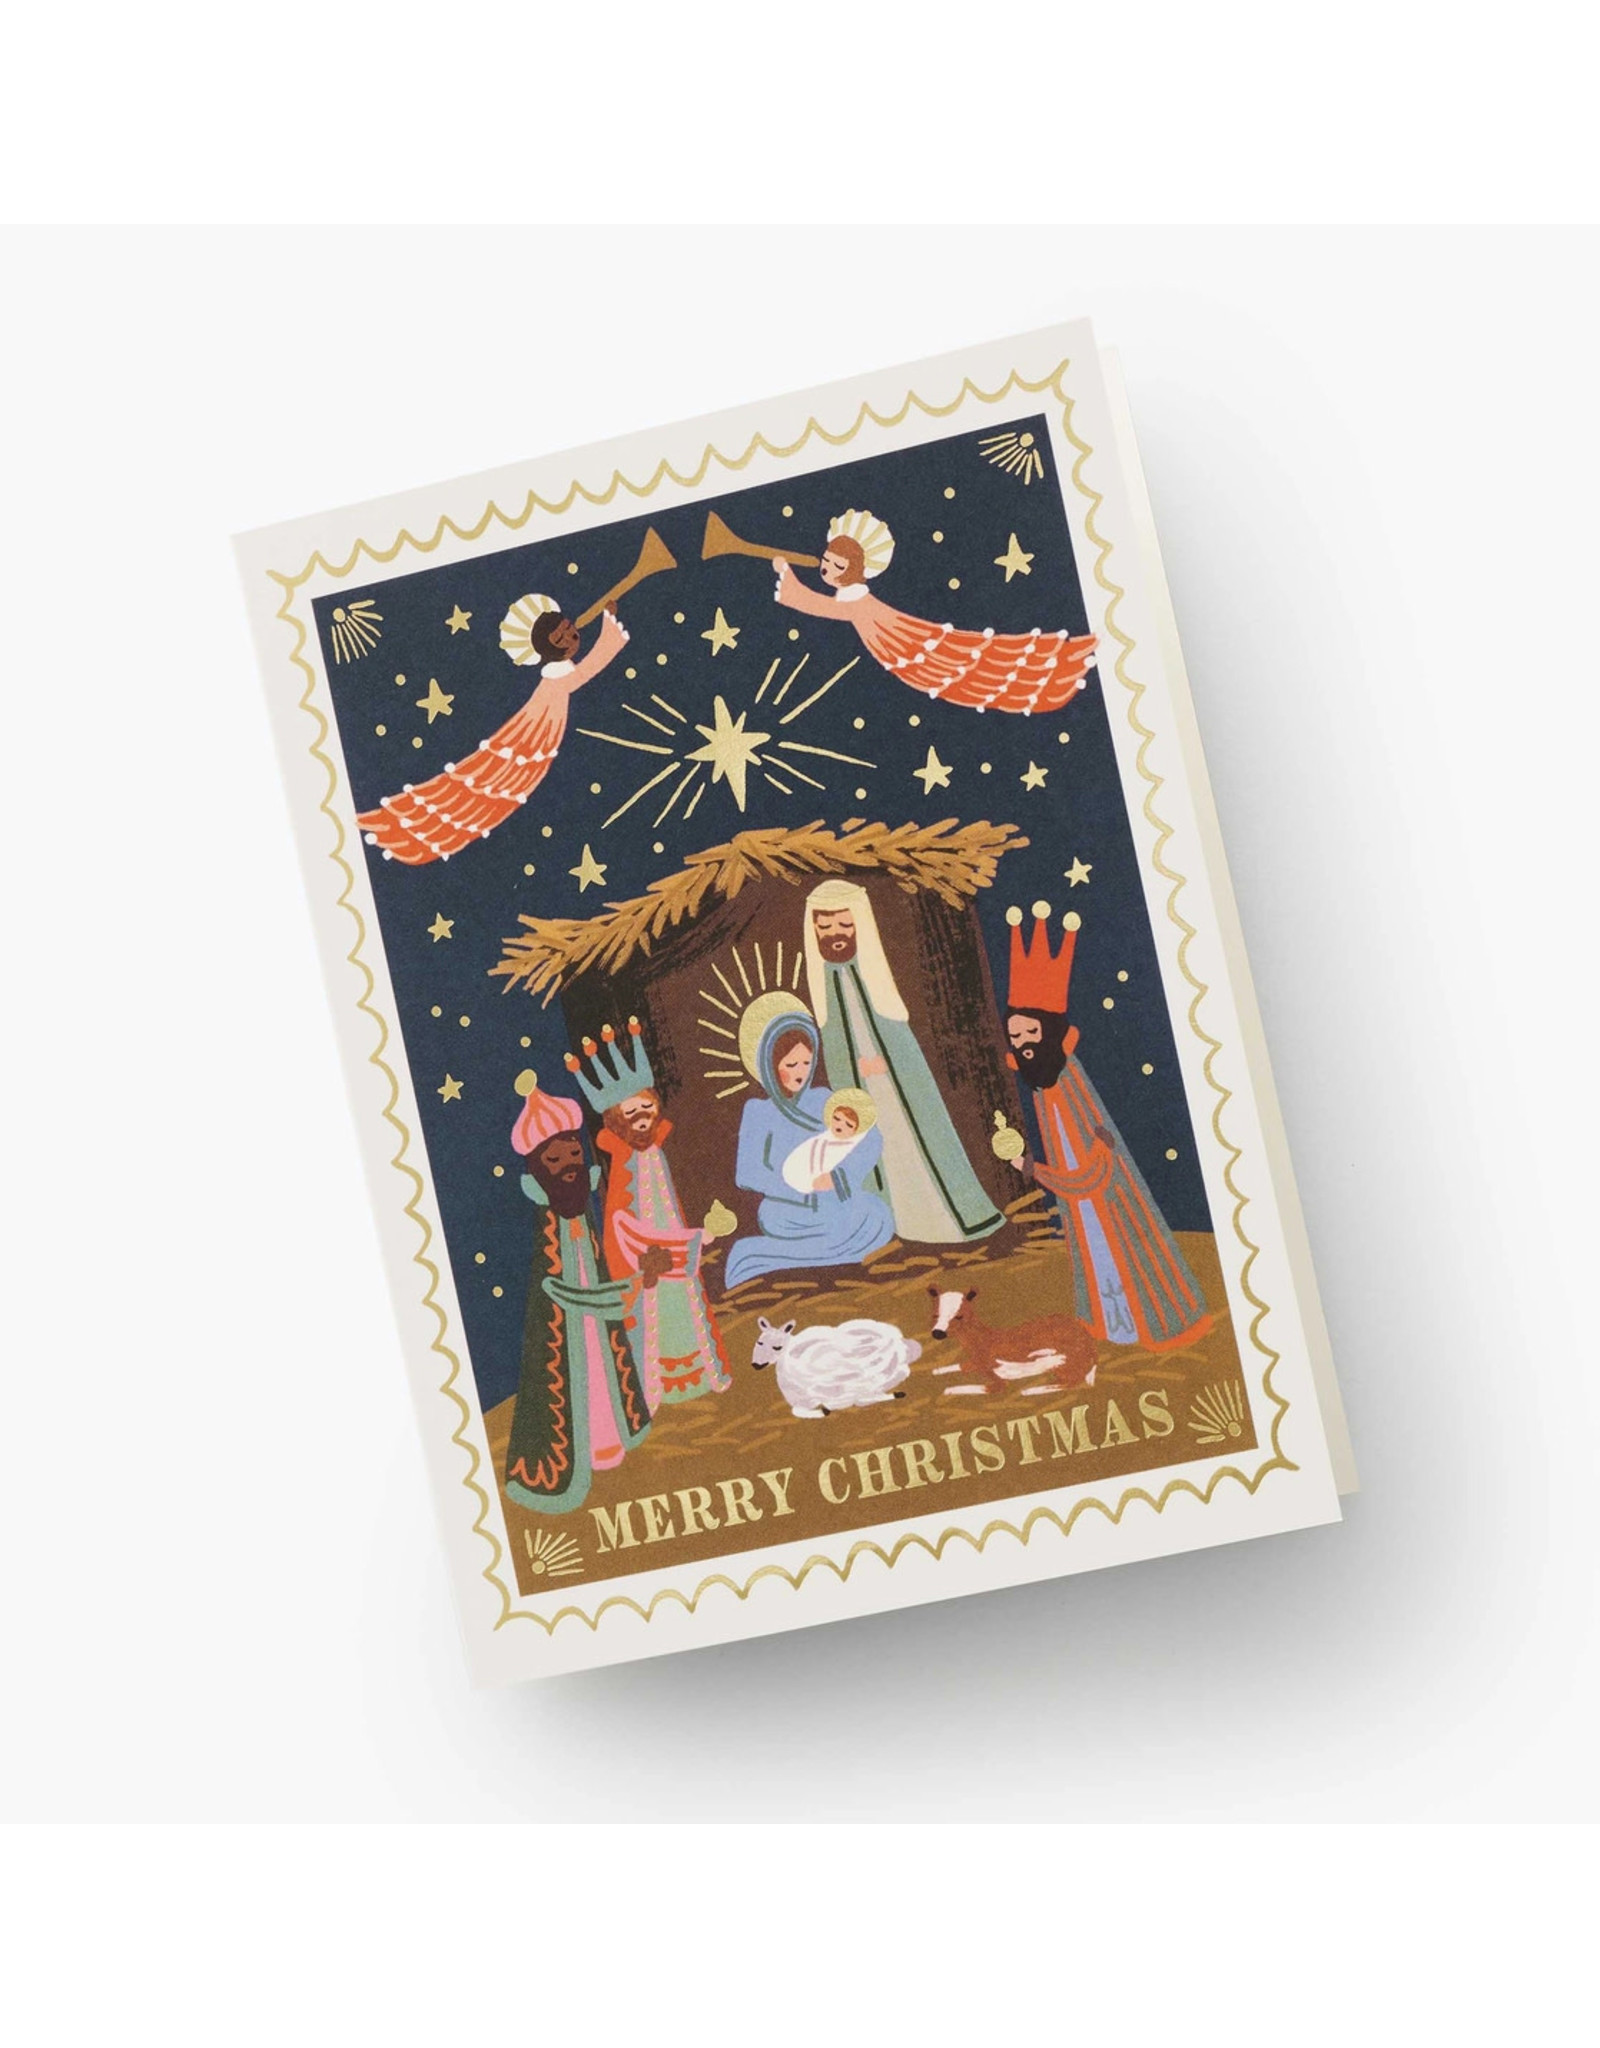 Rifle Paper Co. Christmas Nativity A2 Notecards Boxed of 8